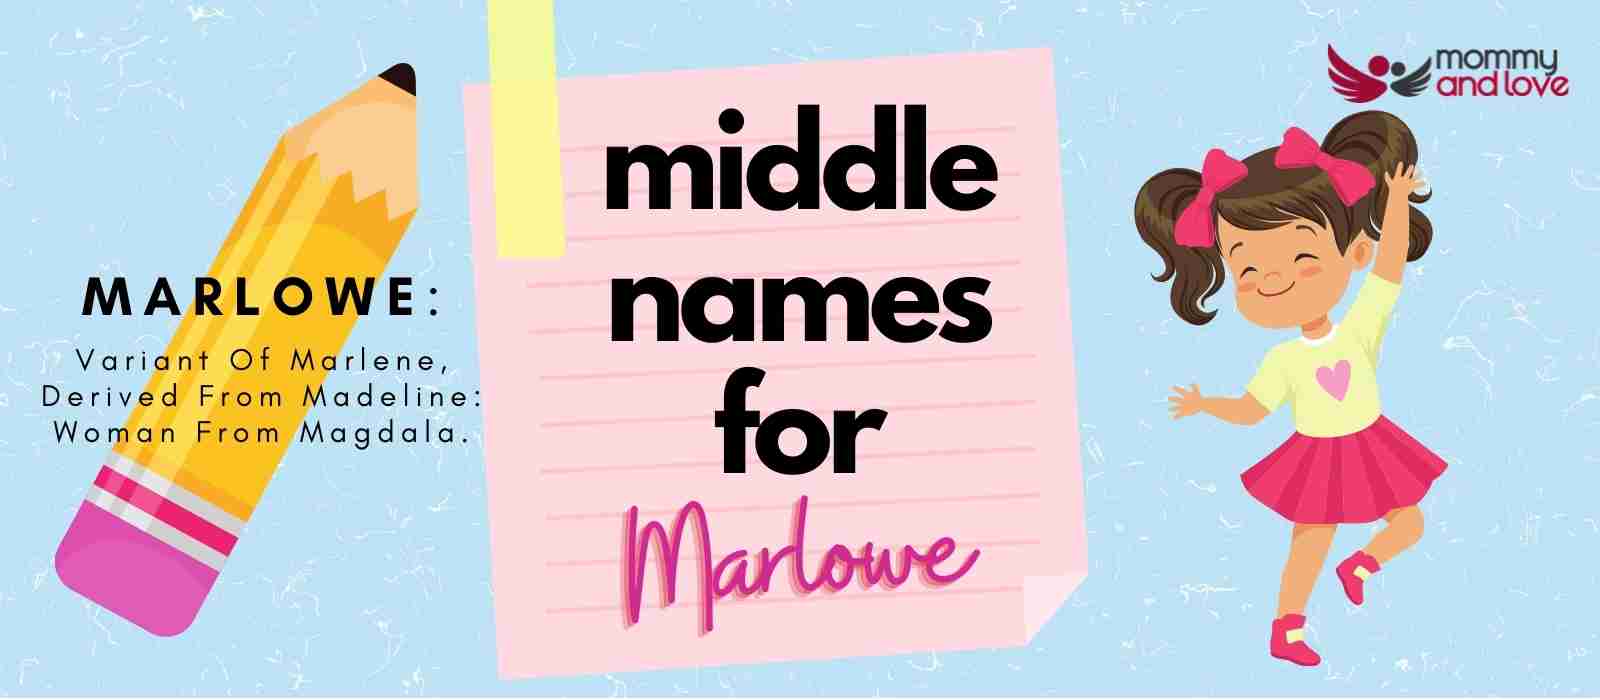 Middle Names for Marlowe